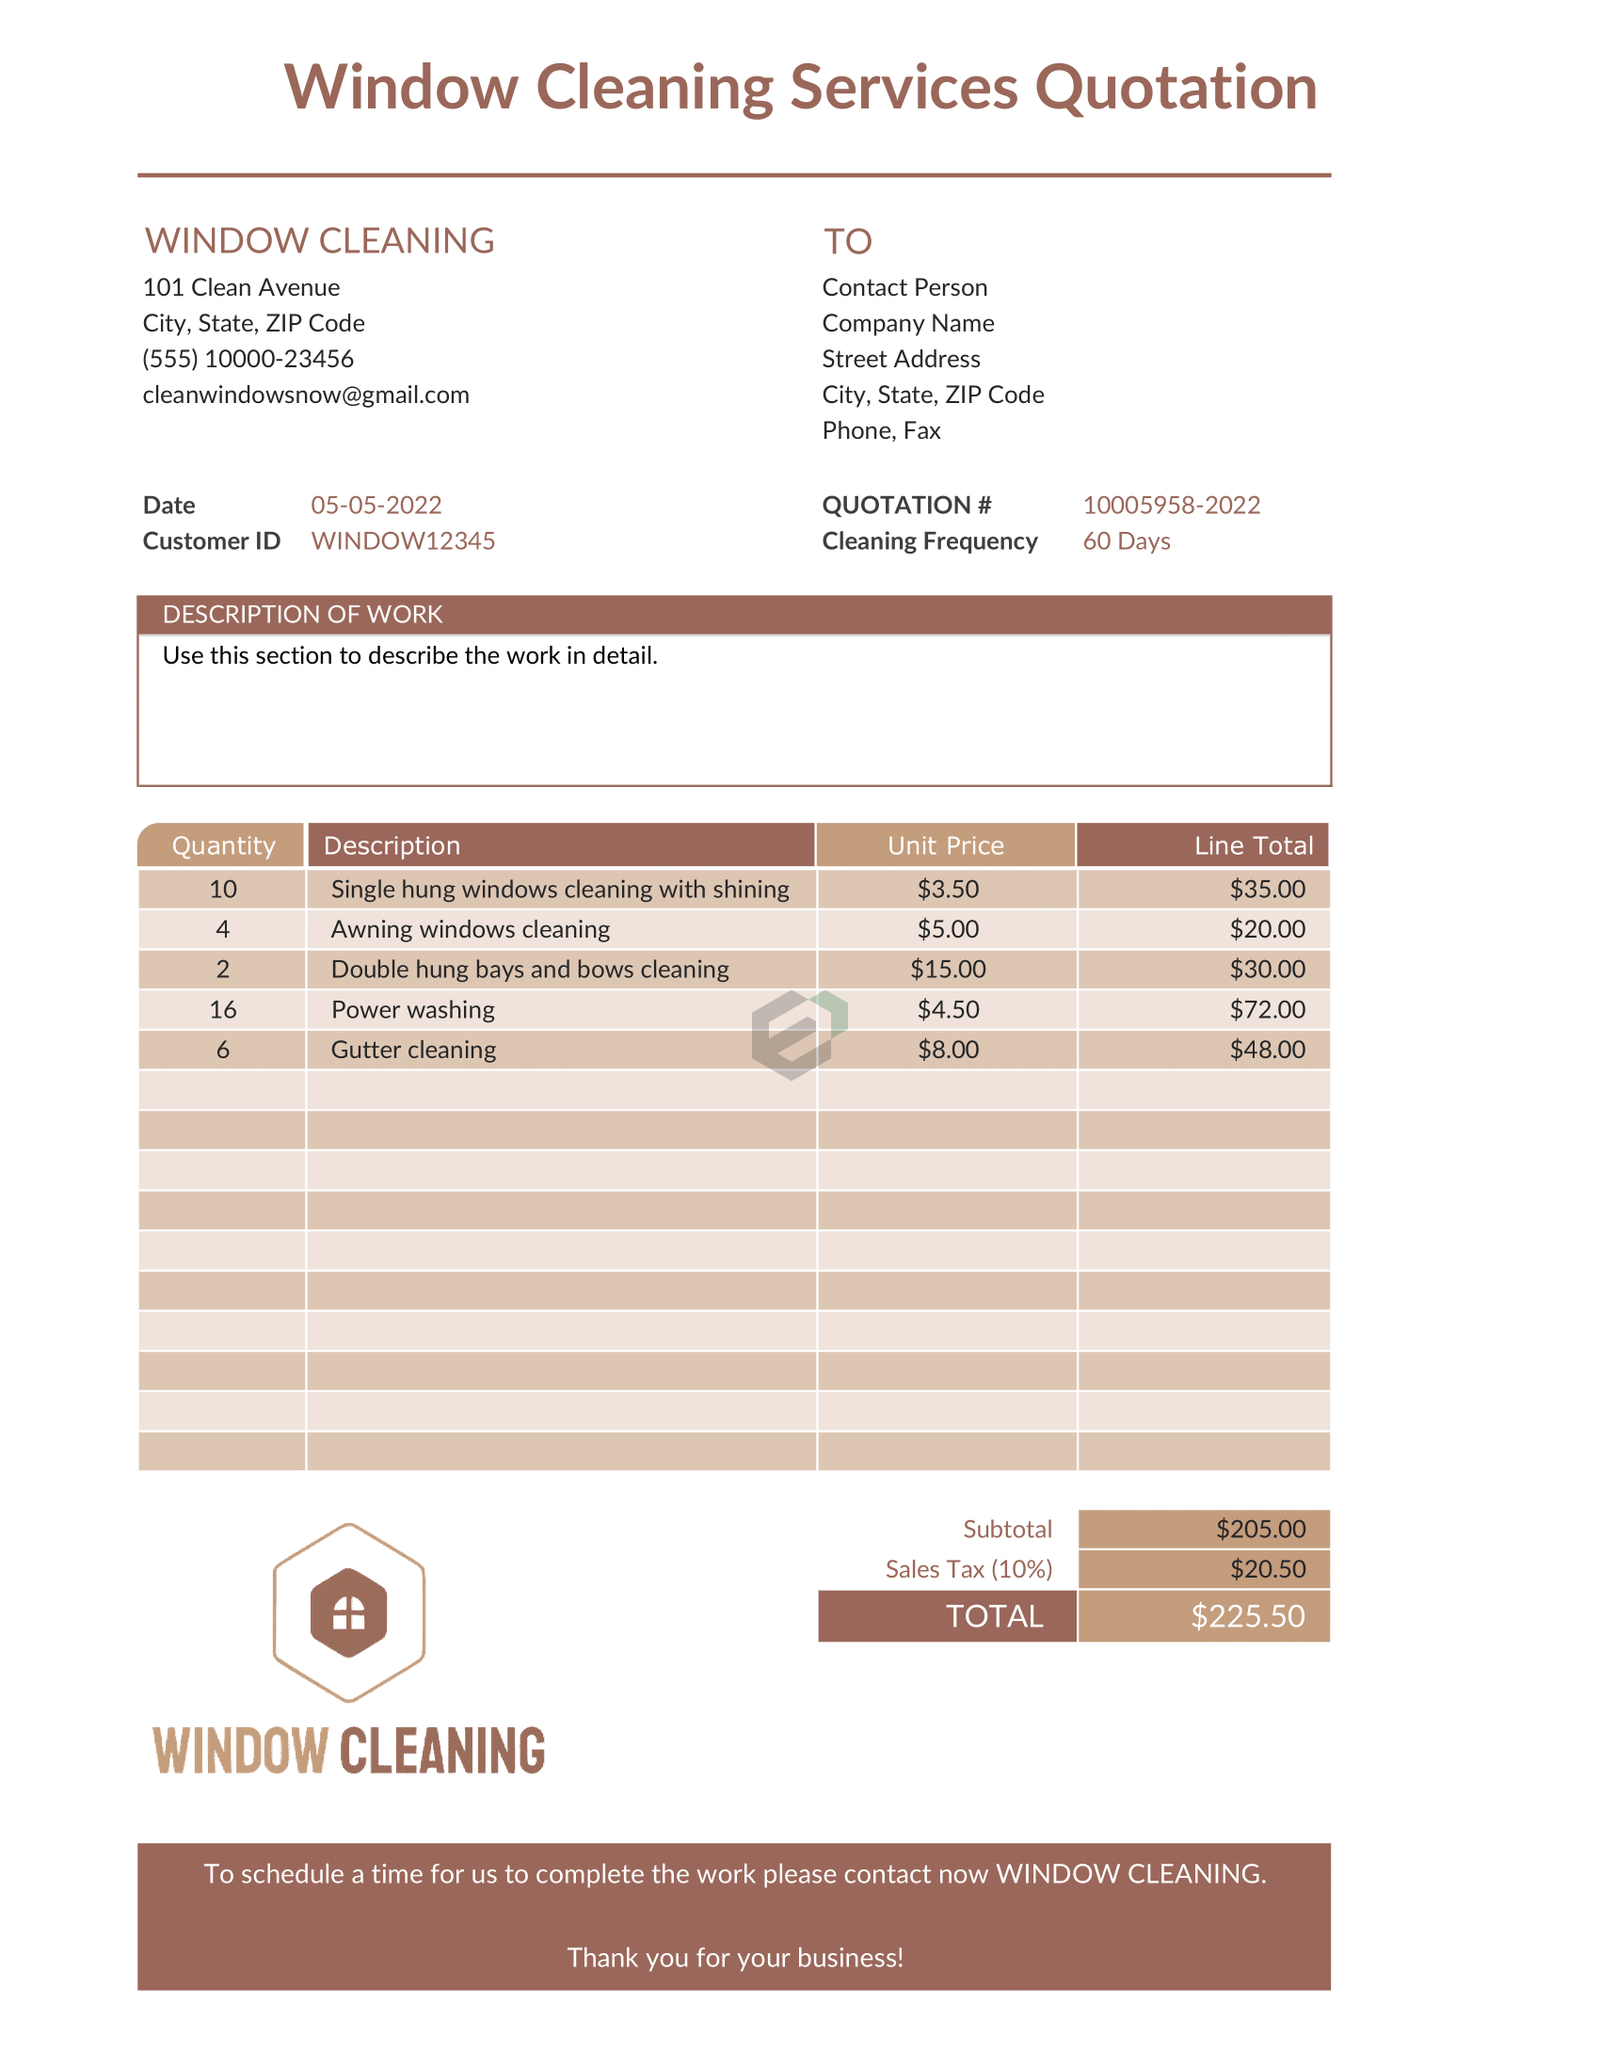 Window Cleaning Services Quotation Template in Excel. It is free to download and easy to customize.